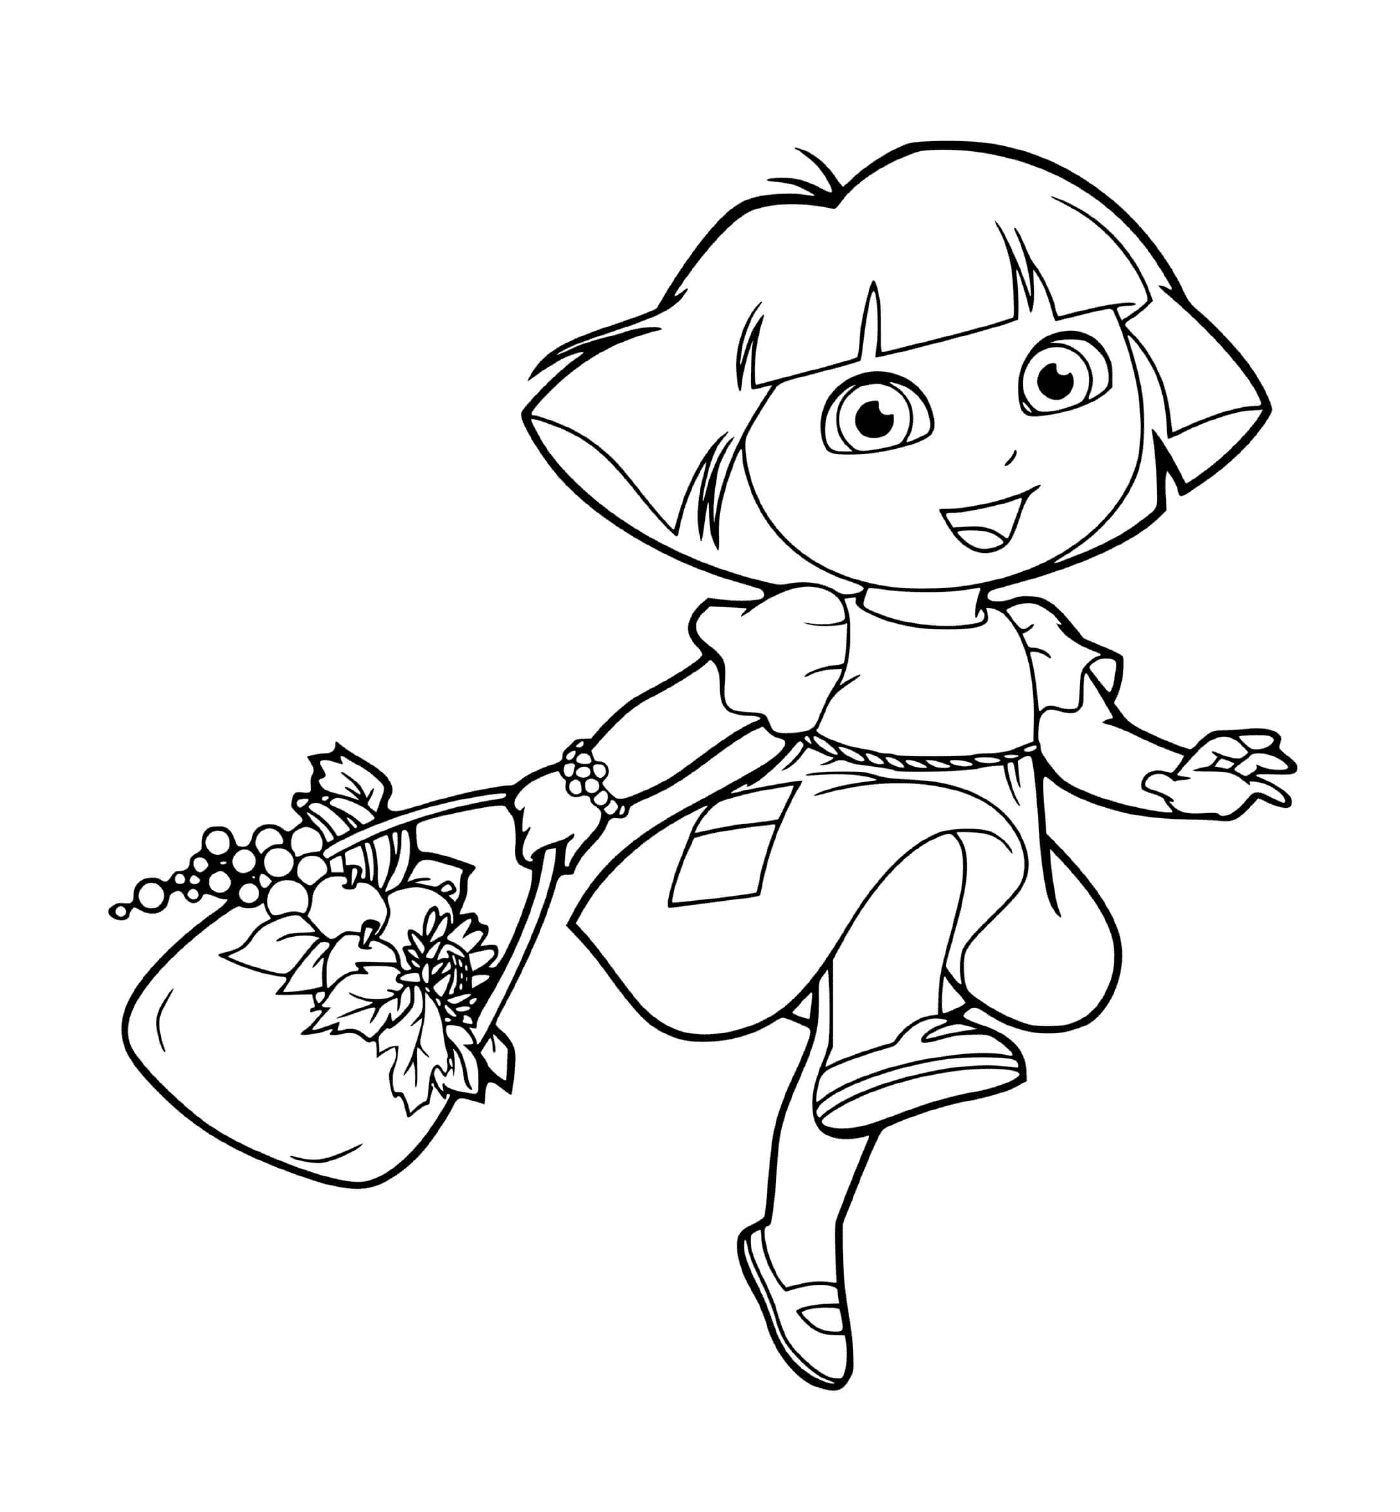  Dora harvests fruits and vegetables with care 